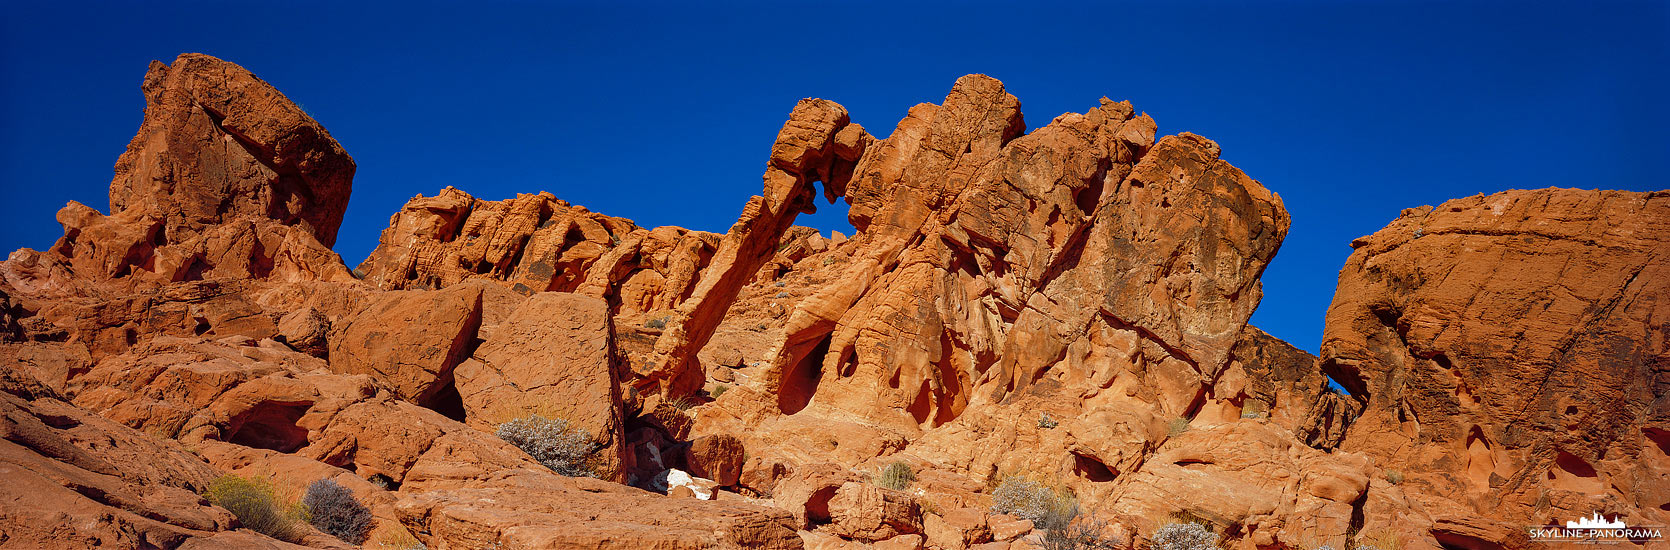 Elephant Rock – Valley of Fire State Park (p_01114)